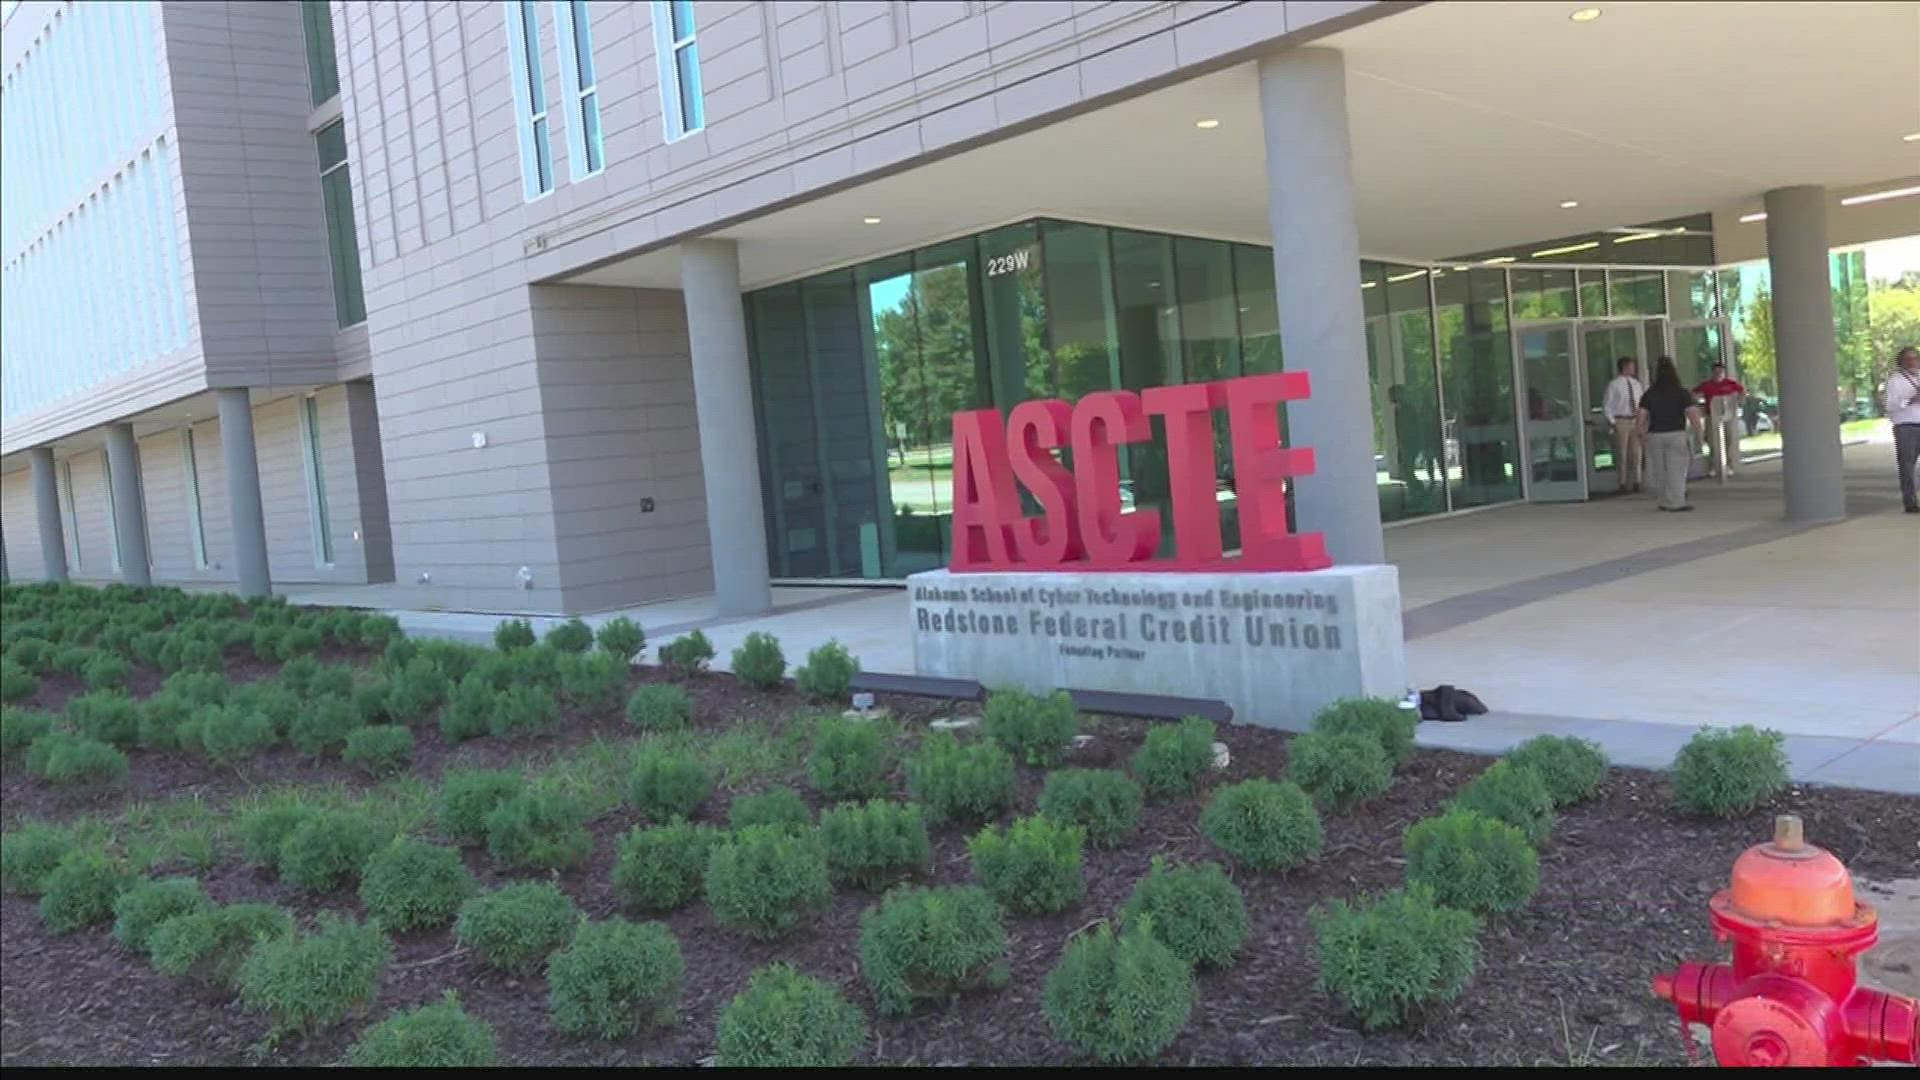 The new ASCTE campus opened its doors on Friday, Sept. 23 with Governor Kay Ivey speaking.